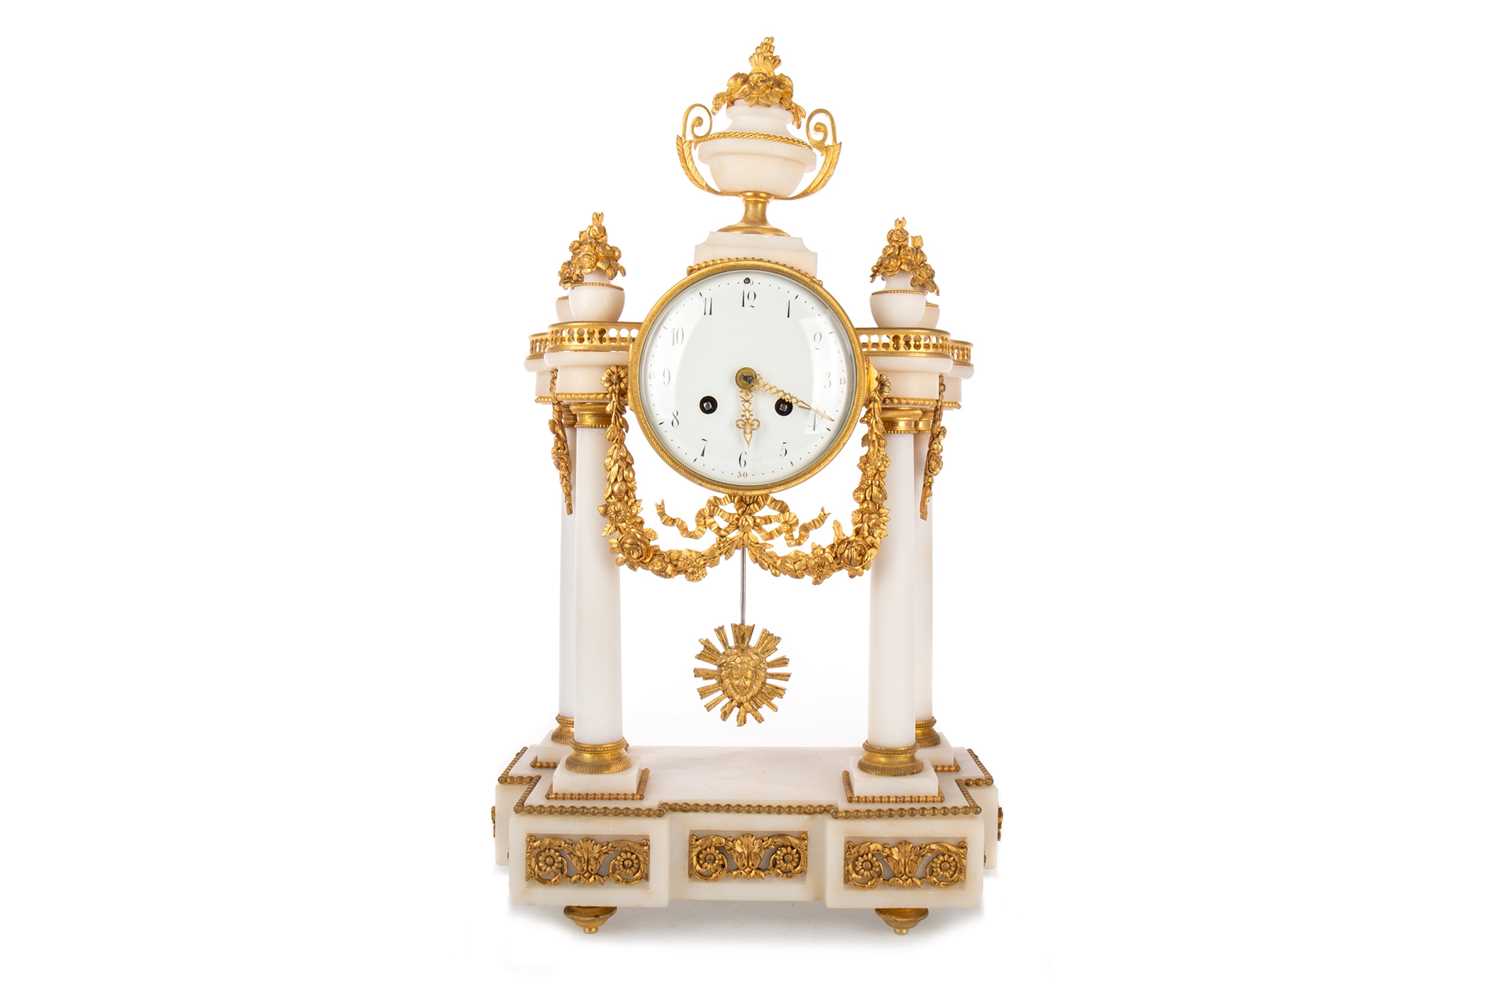 Lot 988 - FRENCH WHITE MARBLE AND GILT METAL PILLARED MANTEL CLOCK